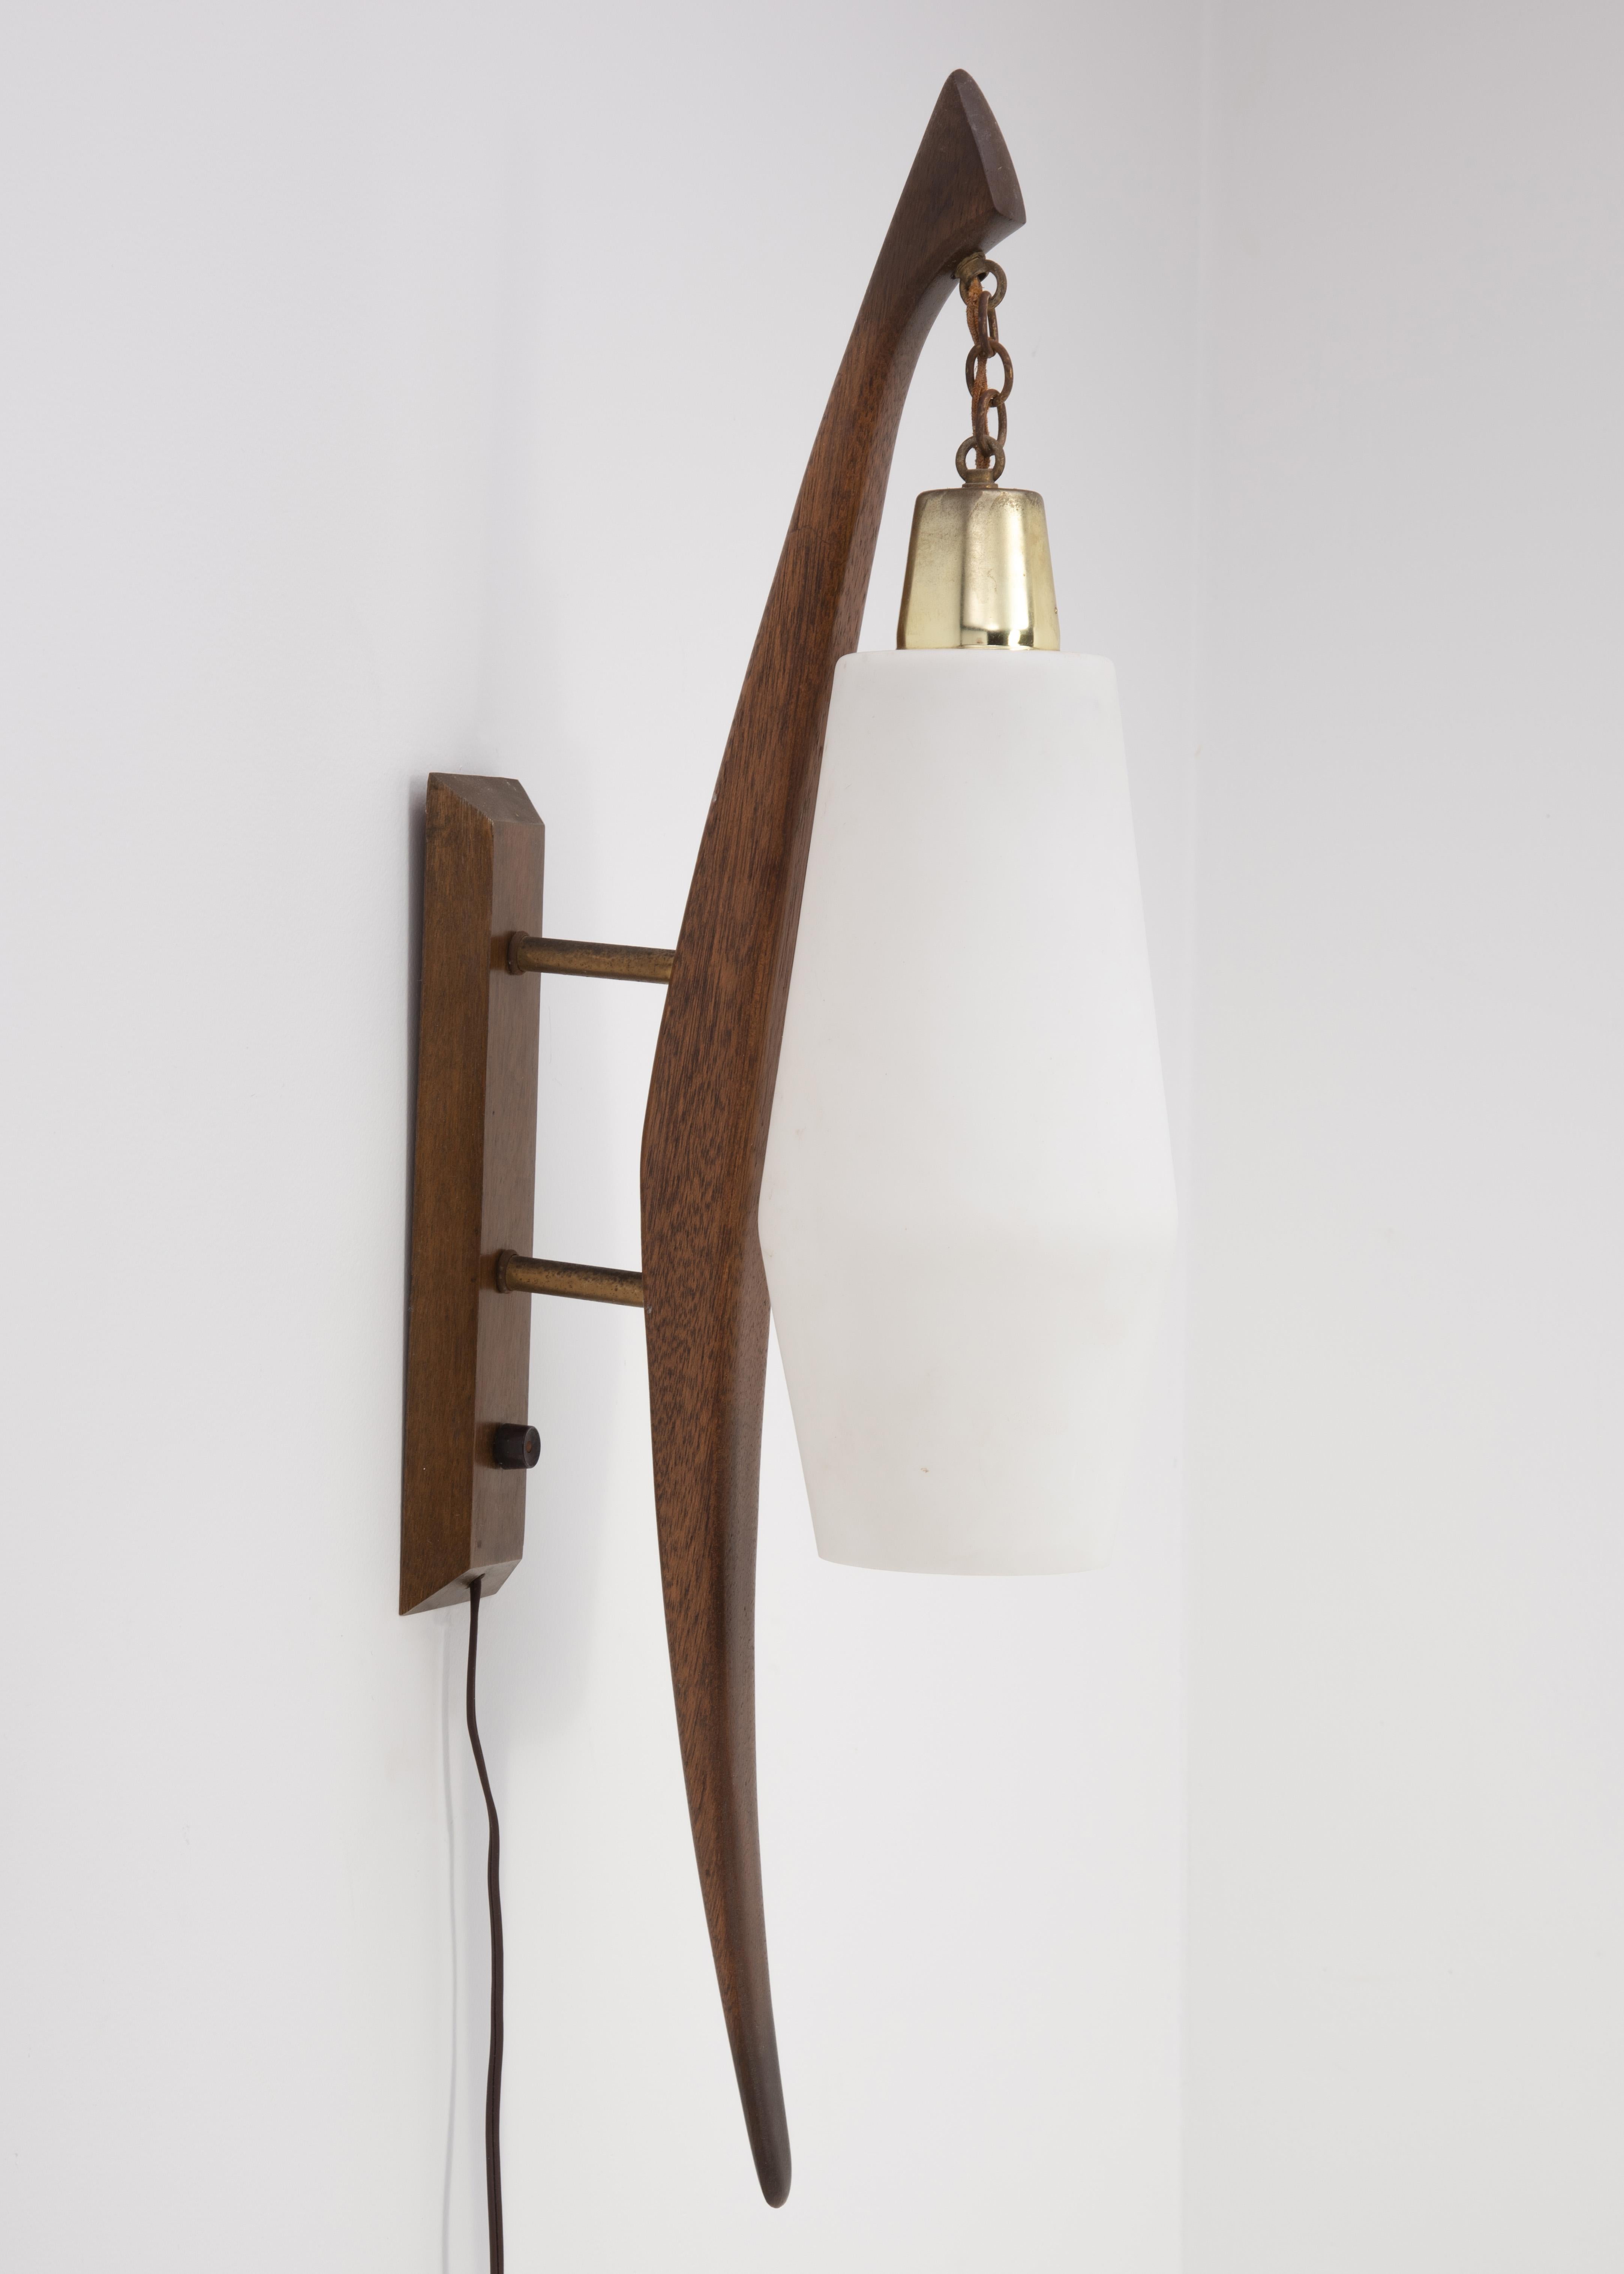 Metal Mid Century Wall Lamp Sconce Mahogany Brass Glass Light American Danish Style For Sale